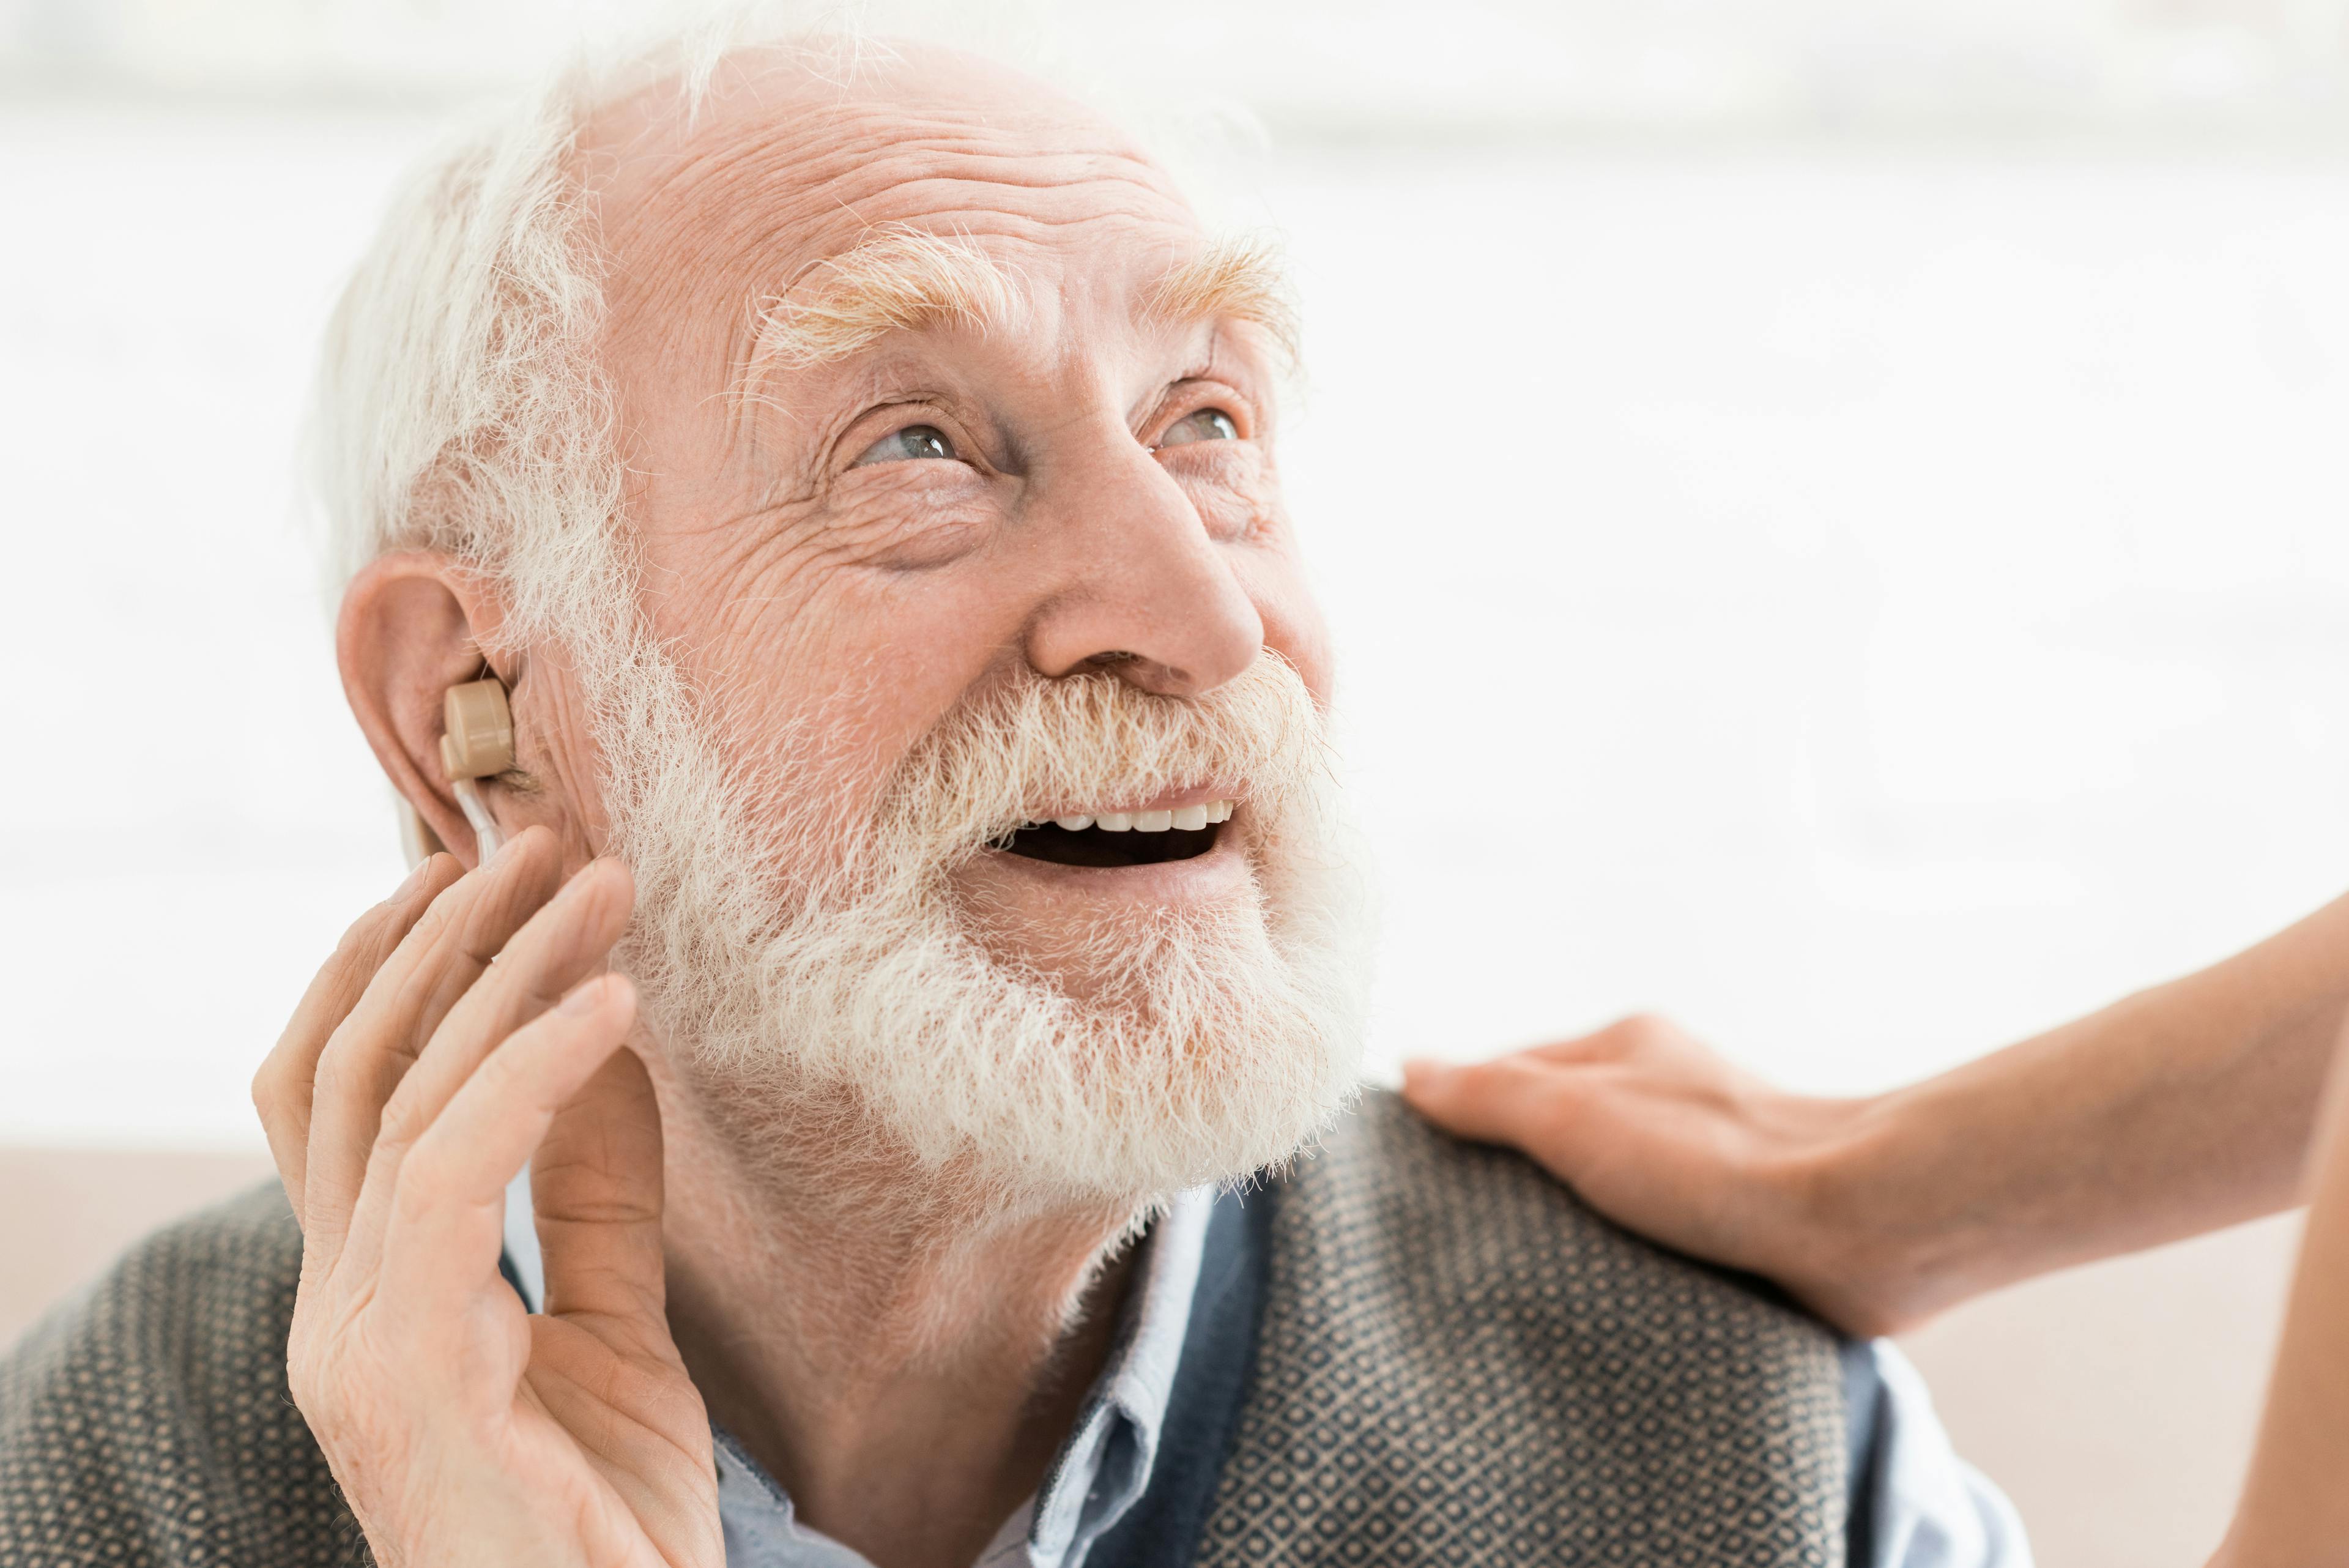 Smiling man with hearing aid.